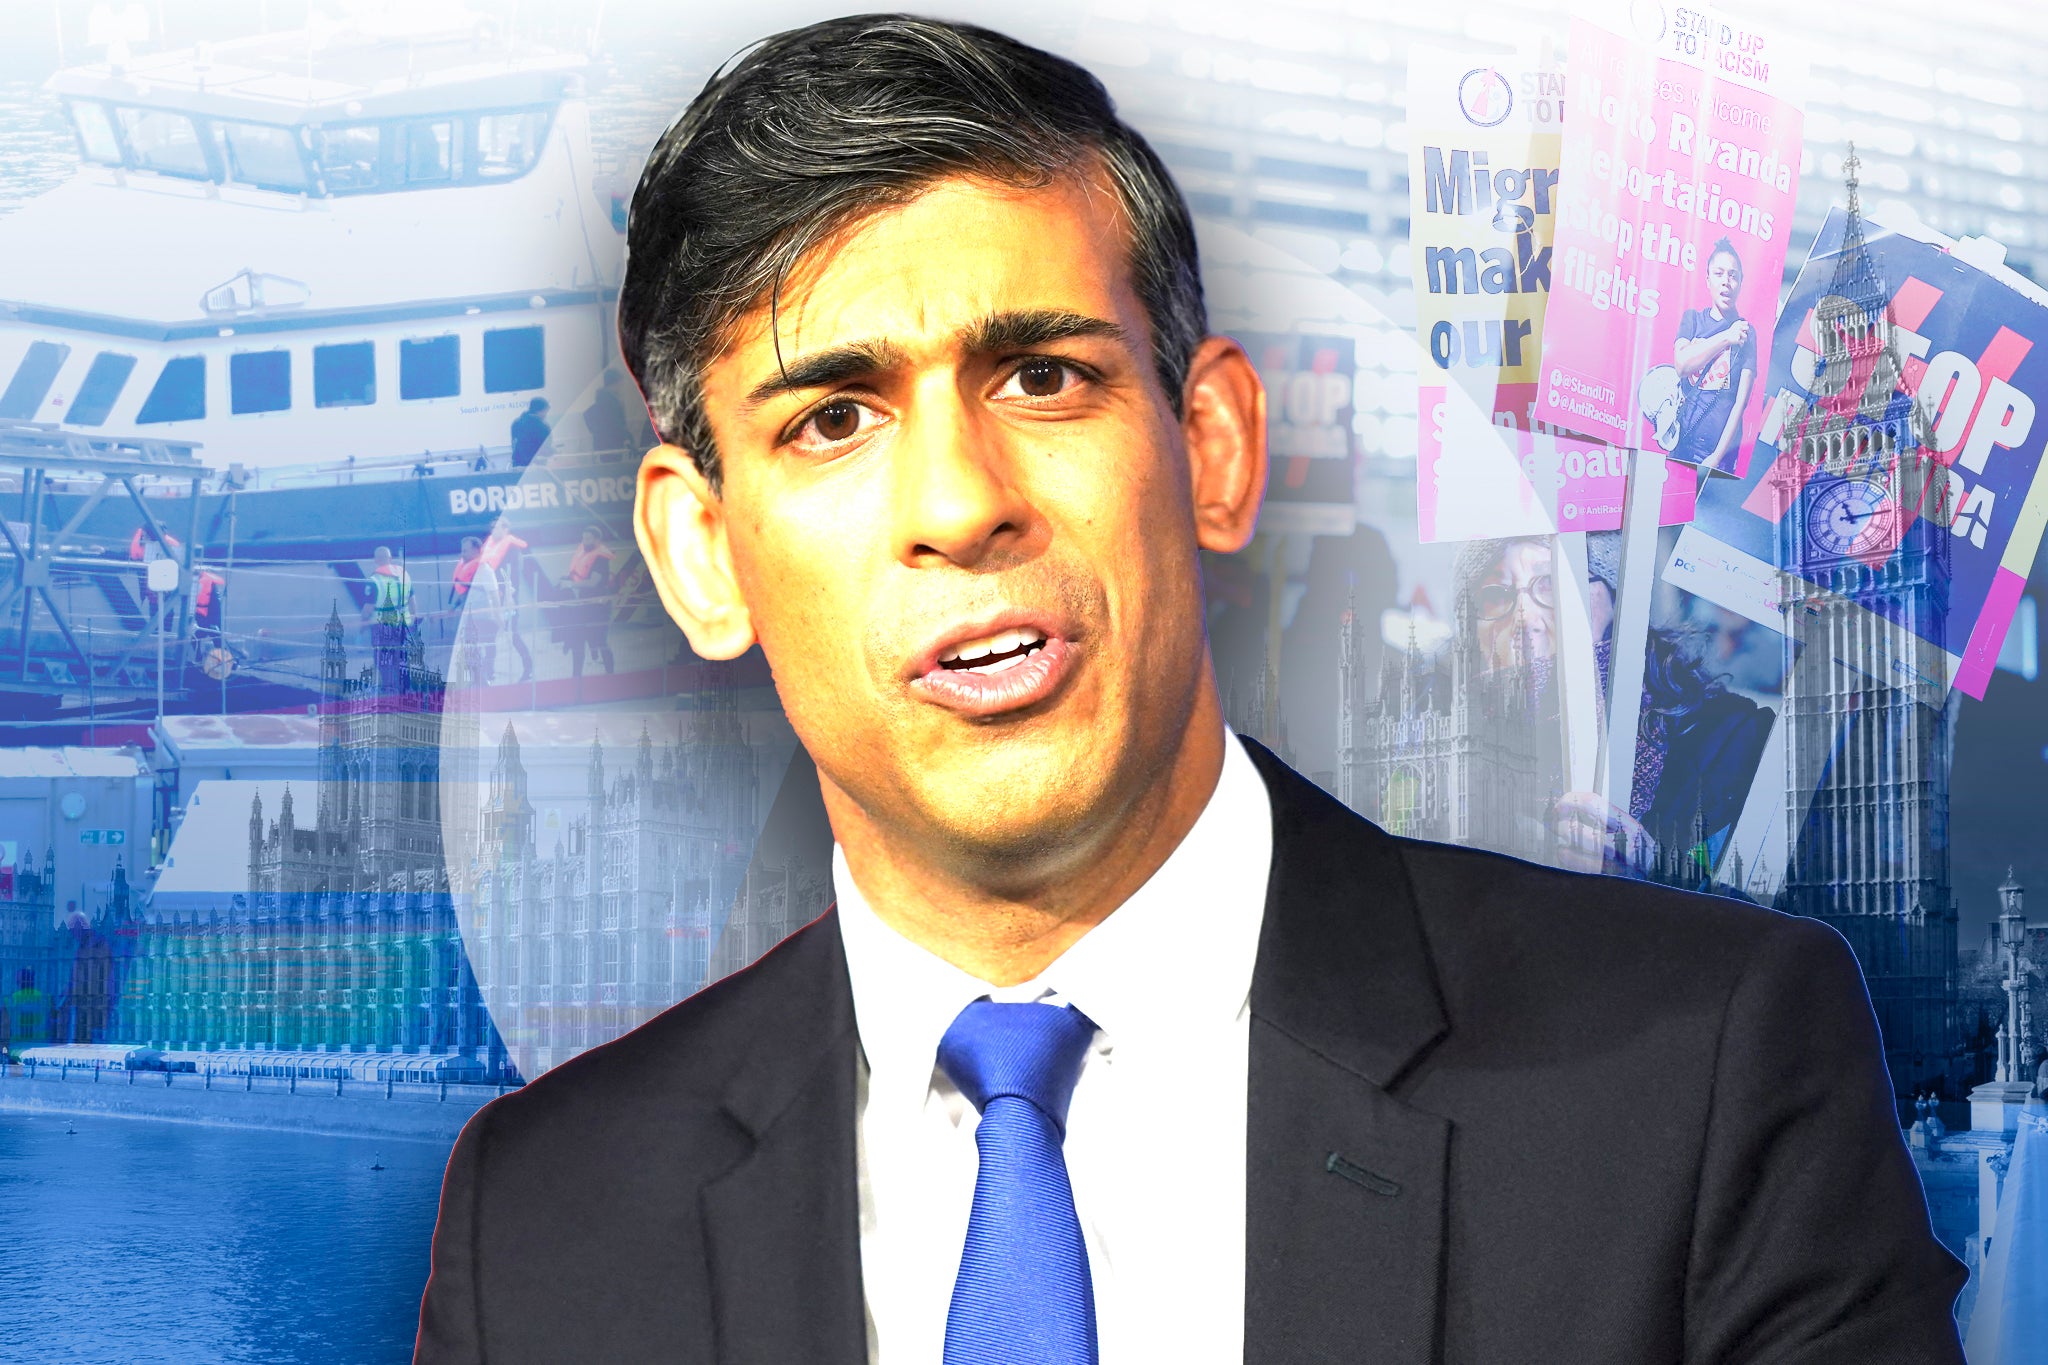 Ahead of the next election, Rishi Sunak has made ‘stopping the boats’ a key pledge of his leadership